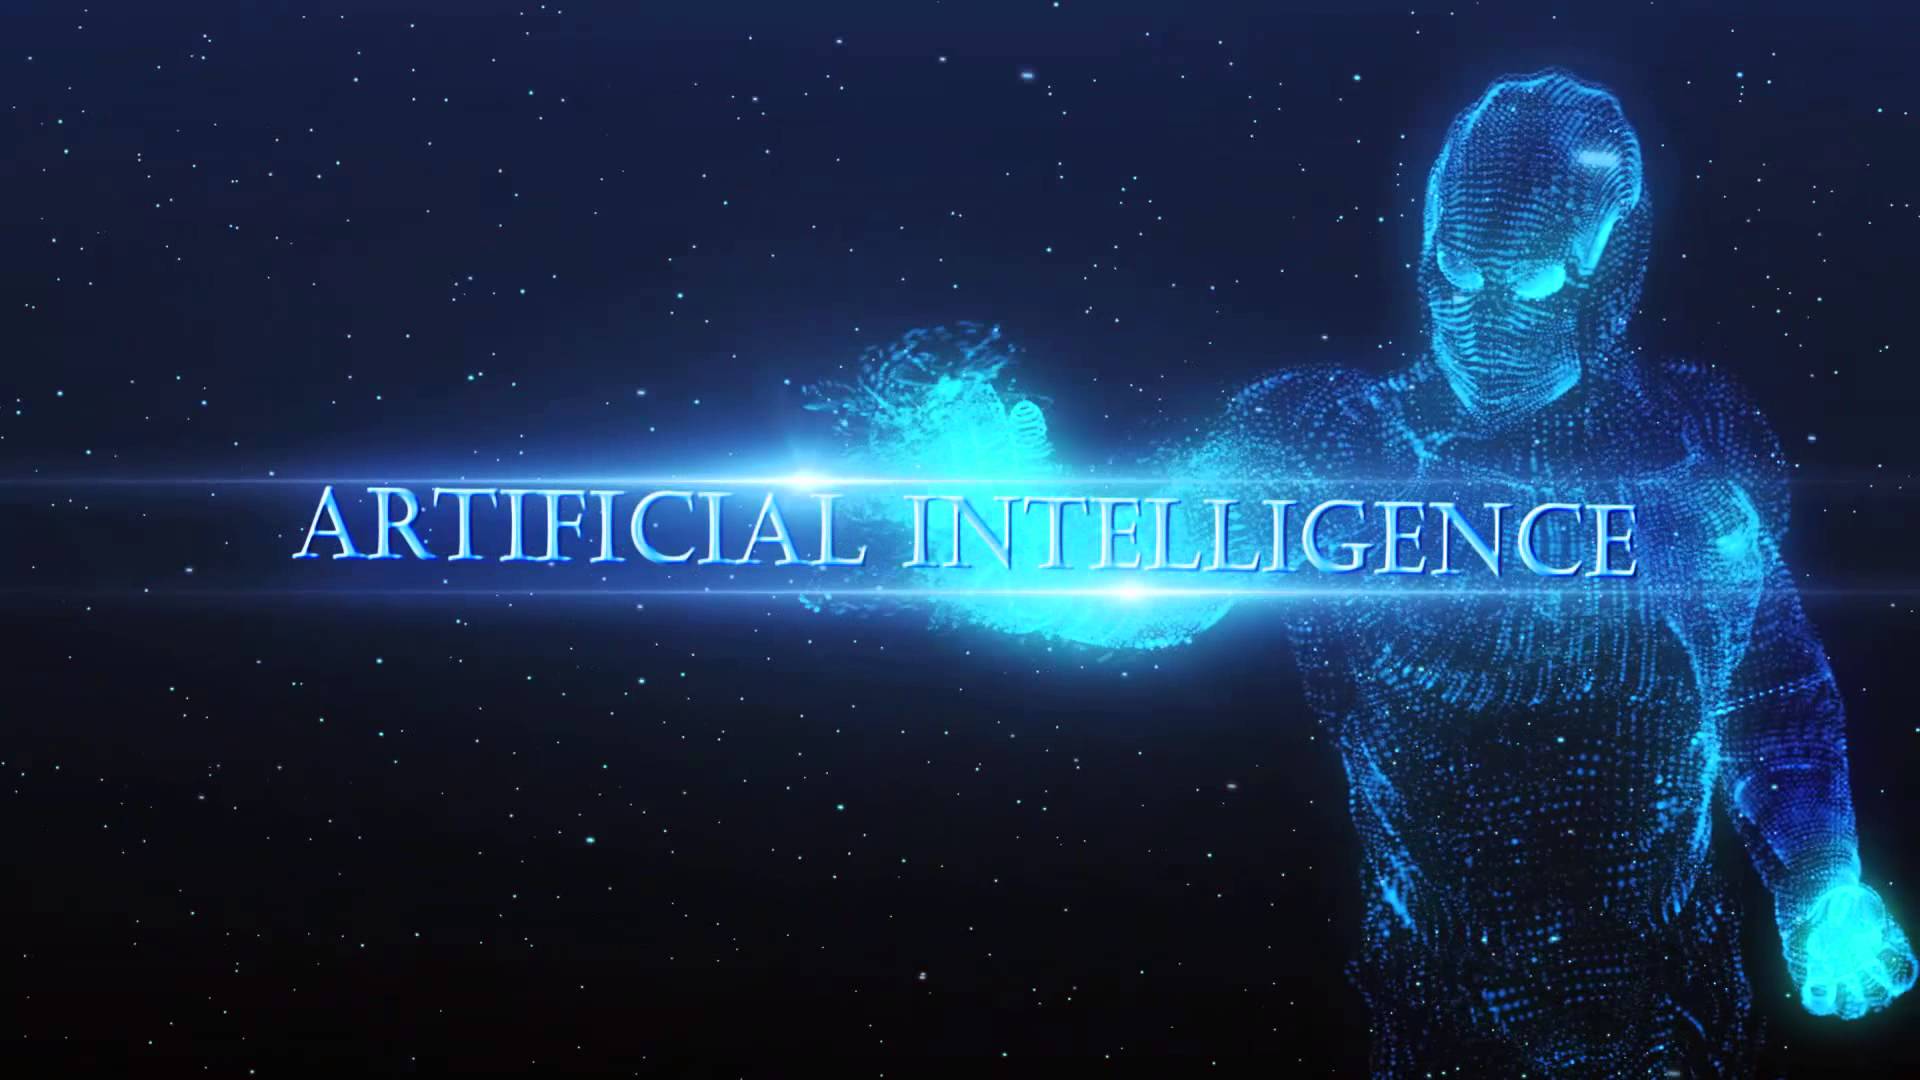 THE DAWN OF ARTIFICIAL INTELLIGENCE